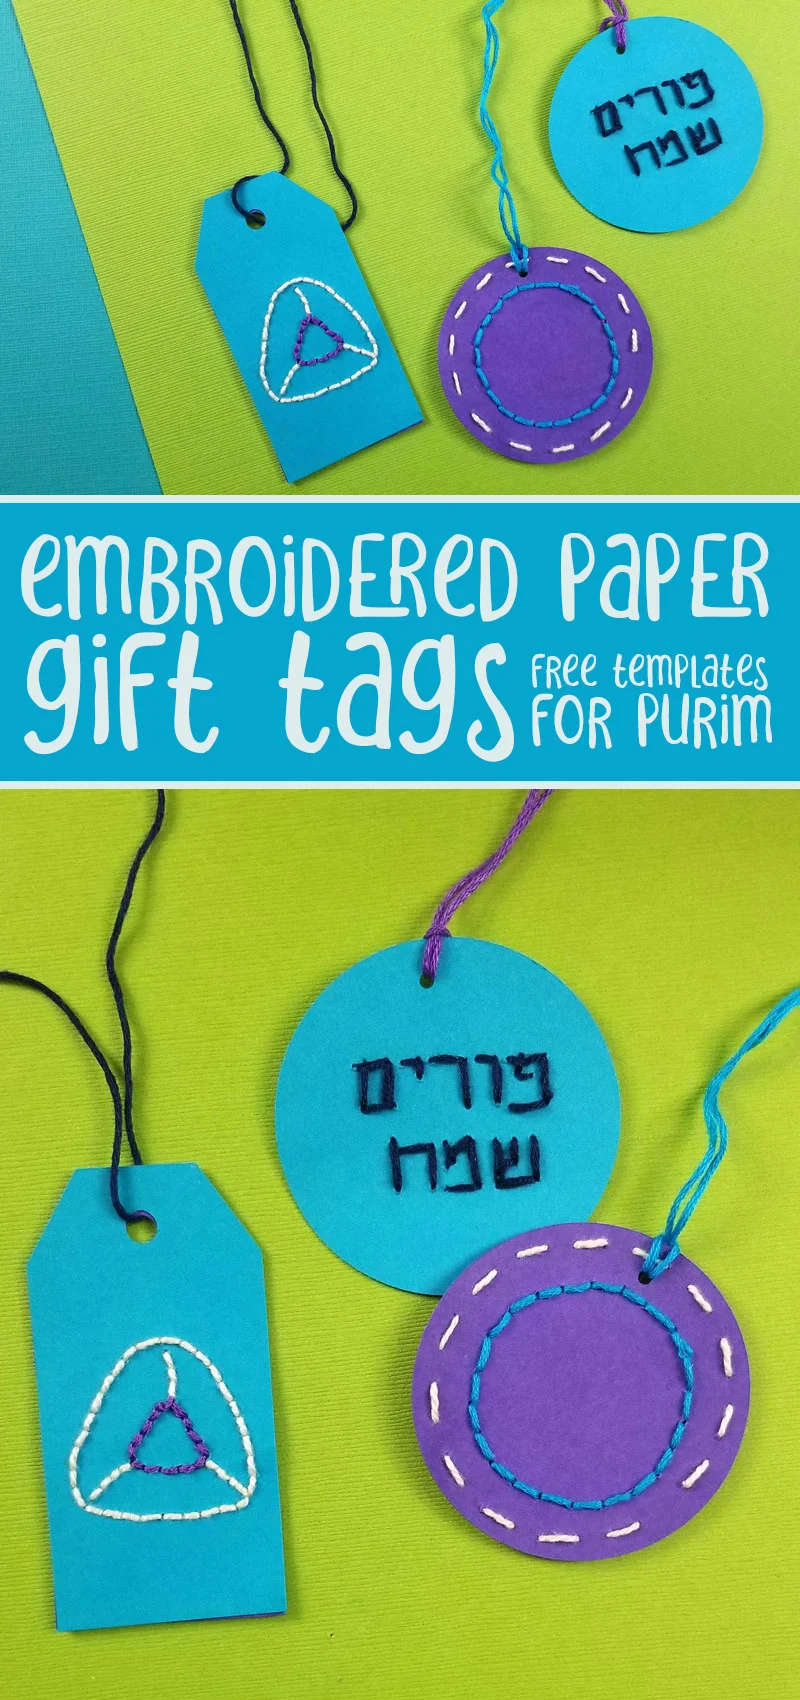 Purim gift tags that are made from stitched paper are a fun Purim craft for kids (if pre-punched), teens, and adults. Learn how to sew paper and embroider cool designs on cardstock gift tags.